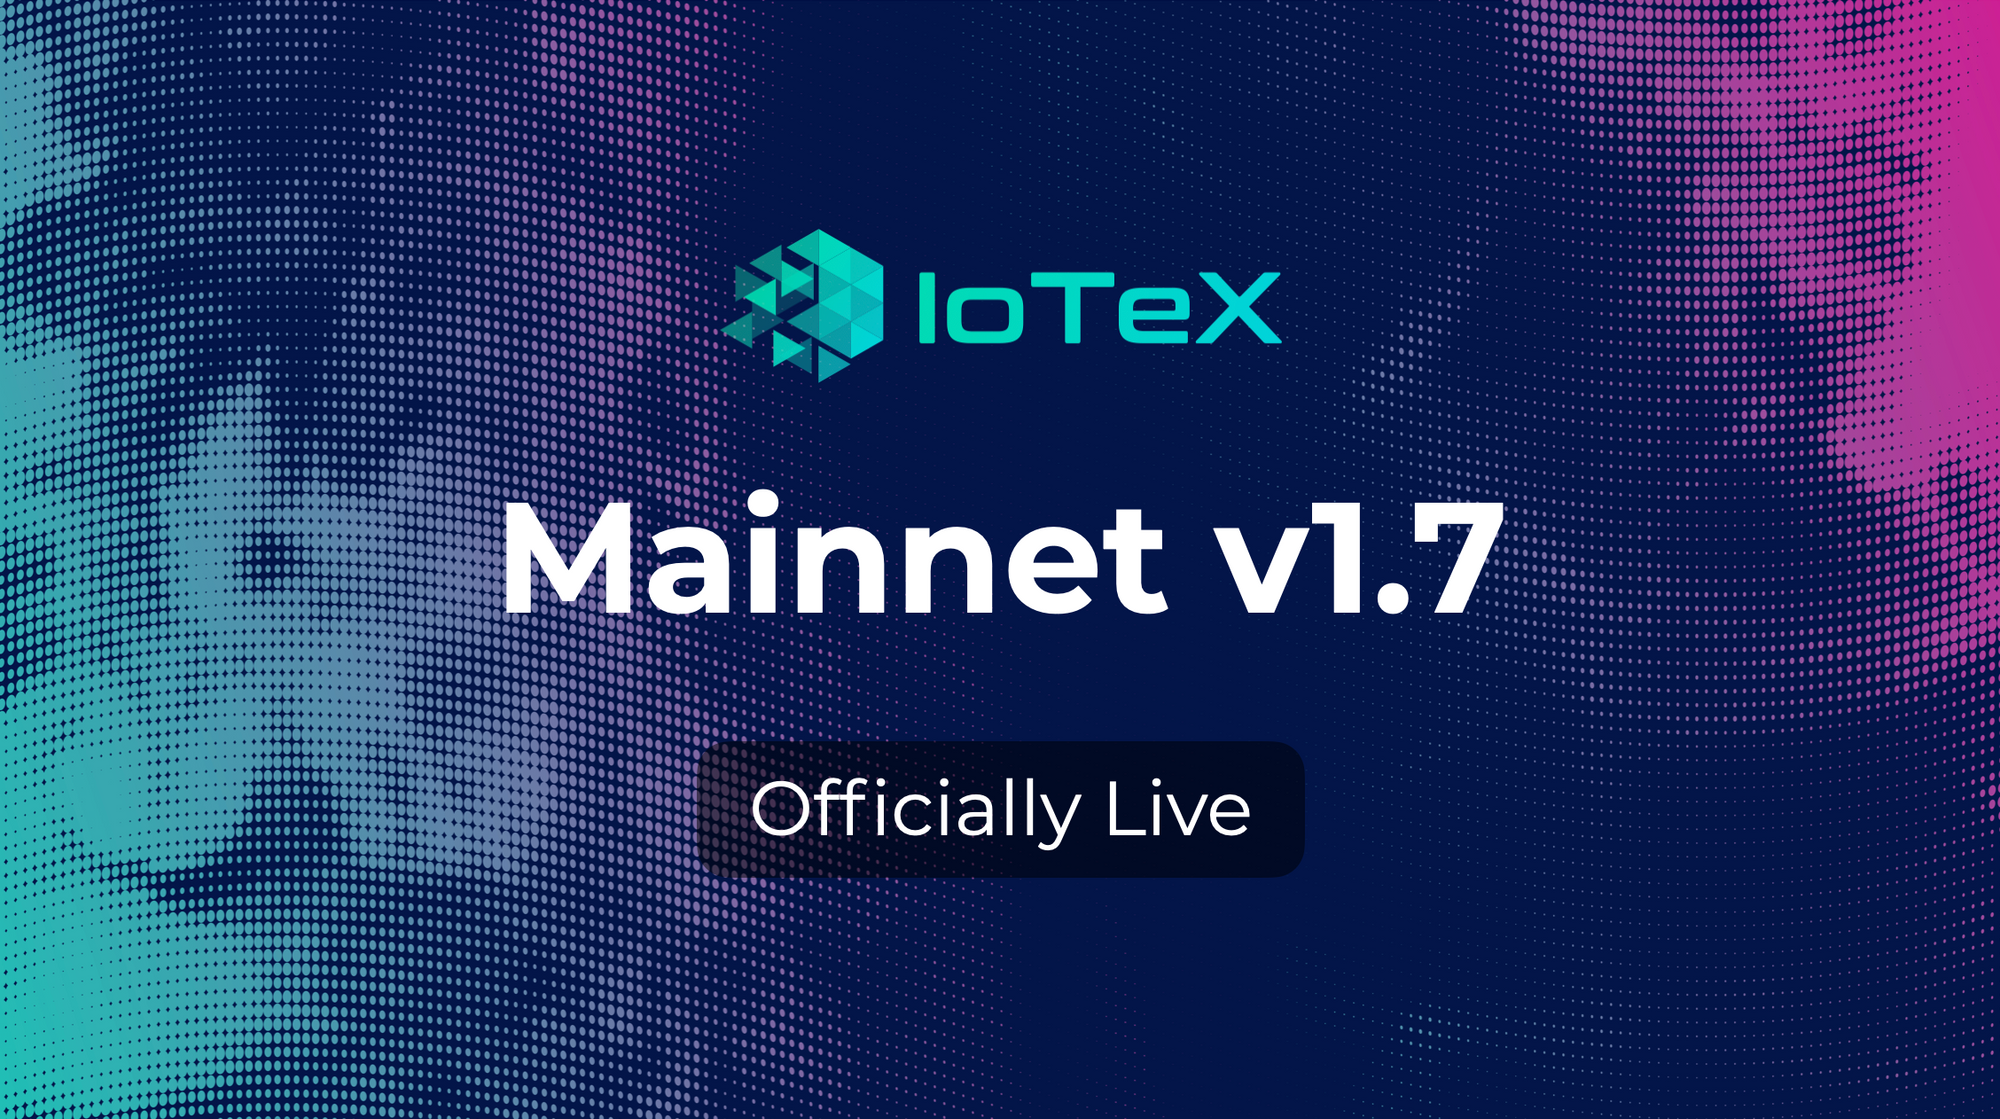 IoTeX Mainnet v1.7 is Officially Live